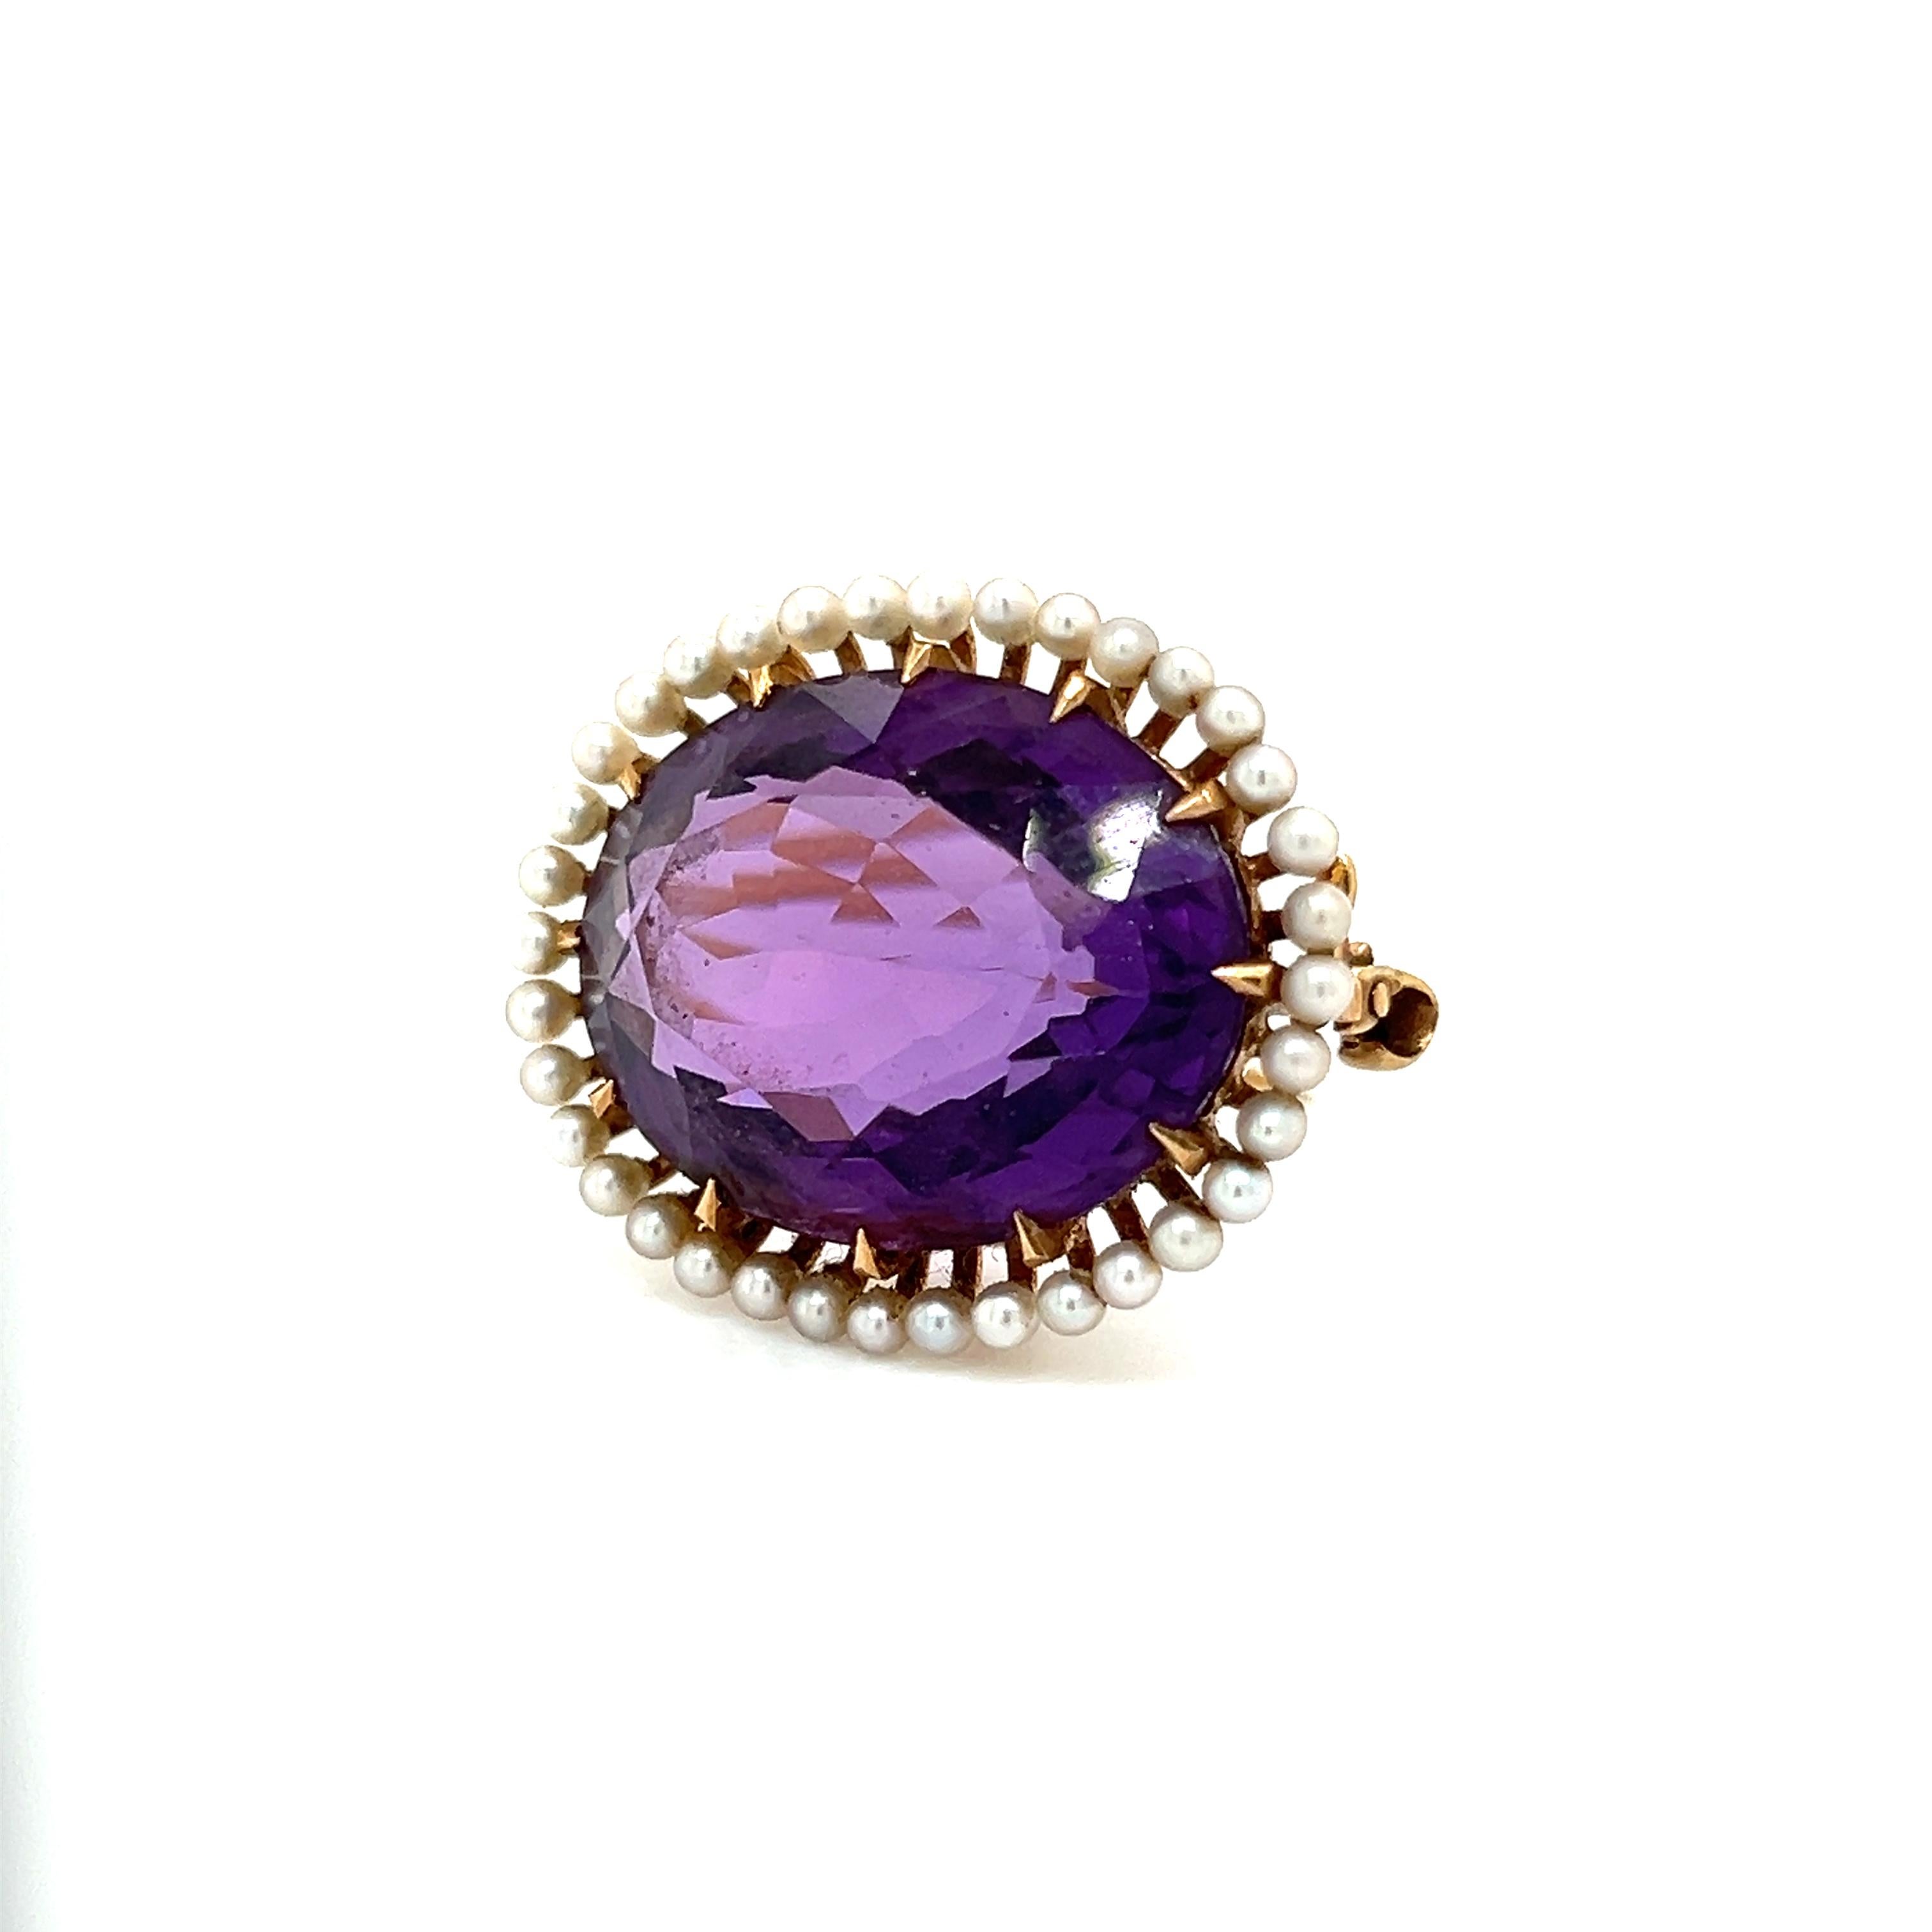 Mixed Cut Victorian Era Amethyst & Seed Pearl Brooch Pendant  For Sale